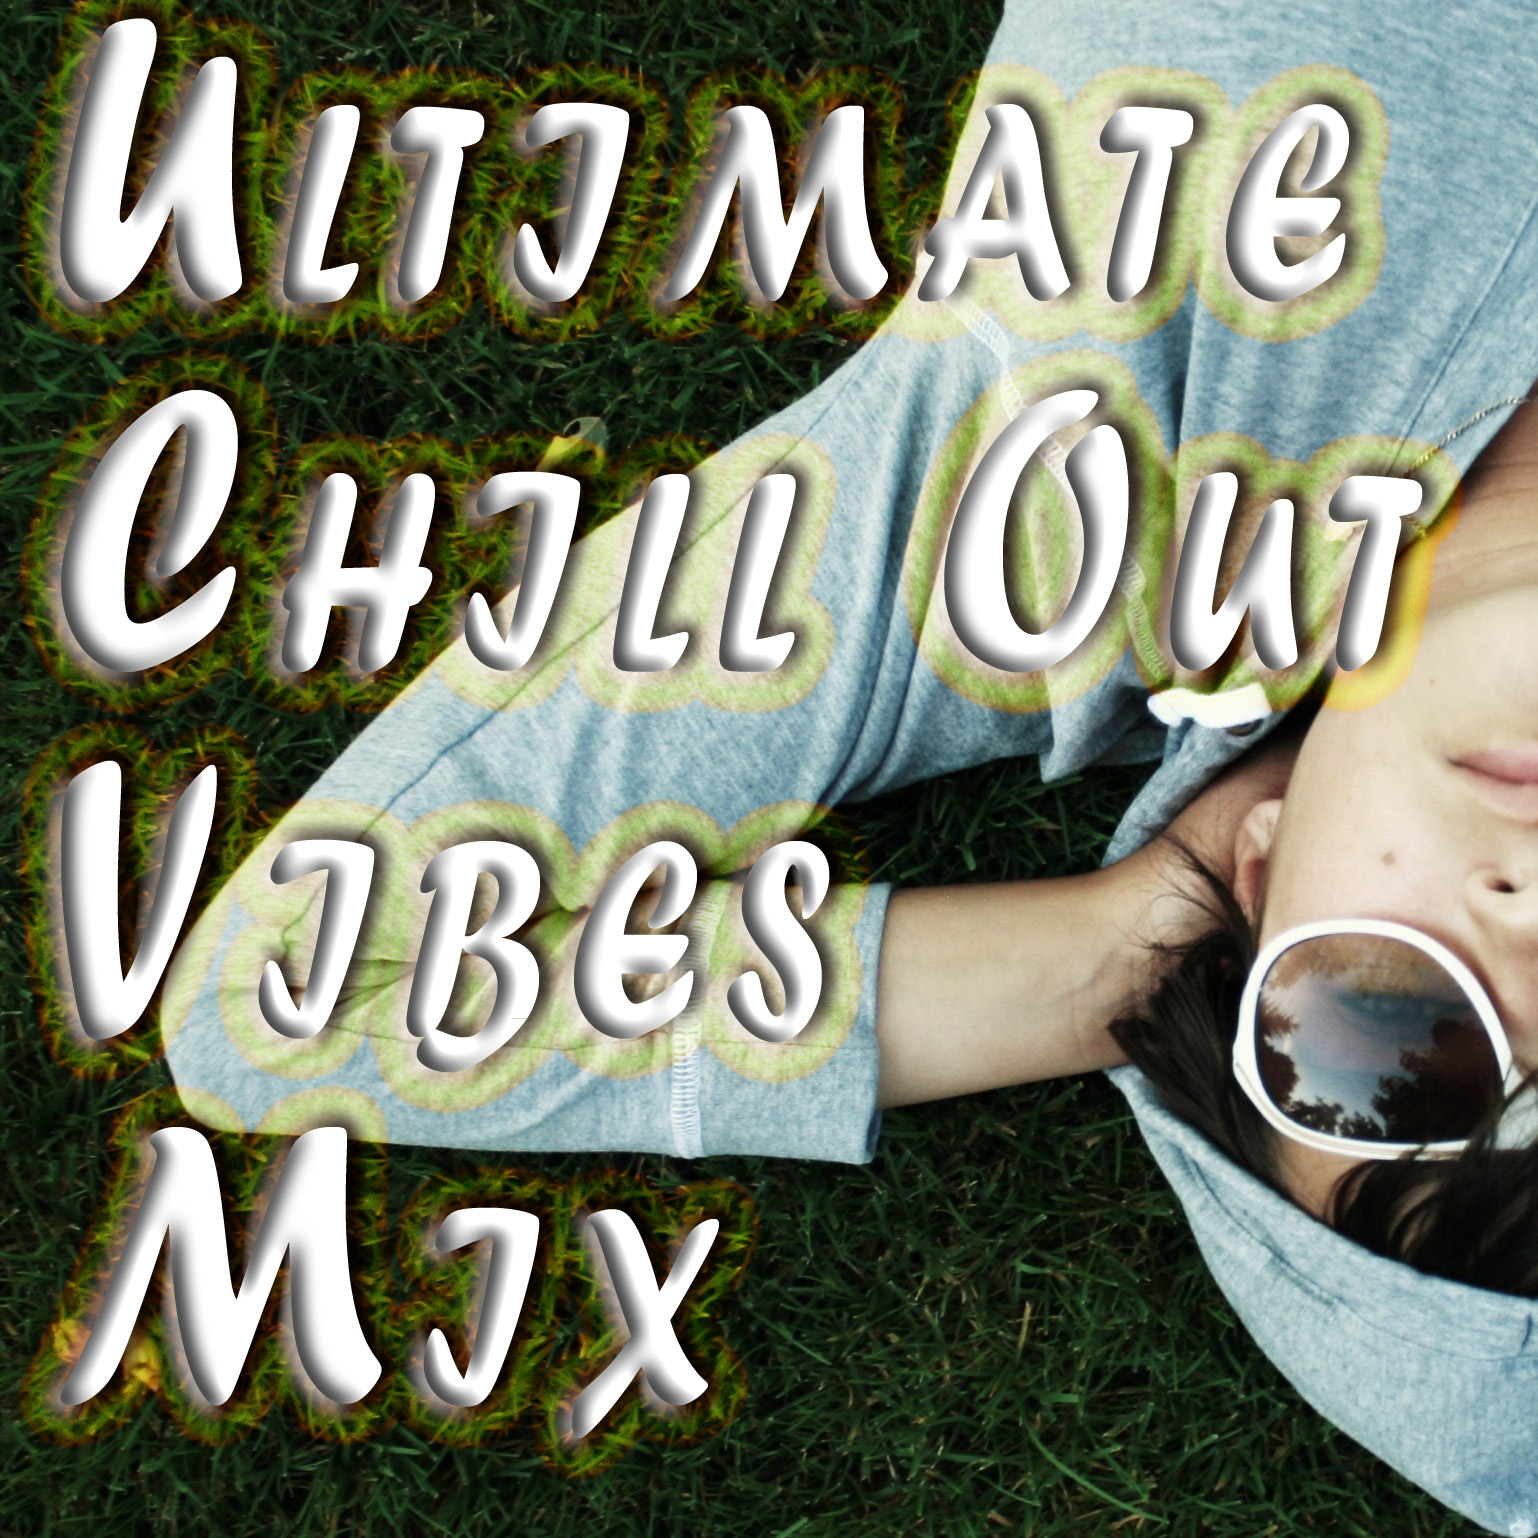 Ultimate Chill Out Vibes Mix - 20 Essential Lounge & Chillout Tracks for a Relaxing Ambience, Total Stress & Anxiety Relief, Spa and Meditation Sessions, Study Focus and a Good Mood